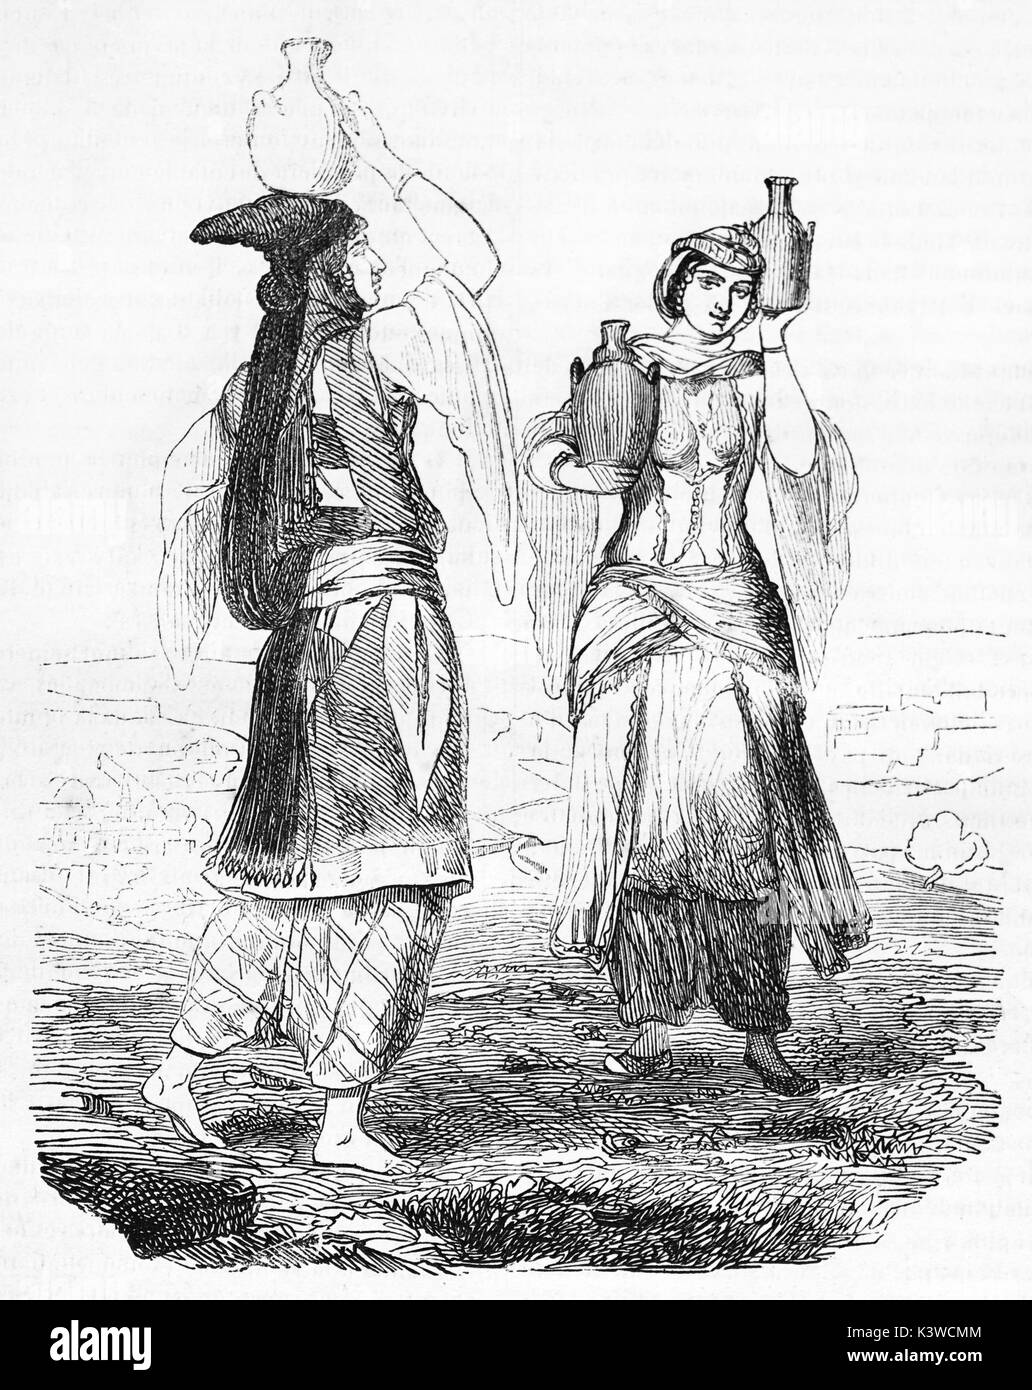 Old illustration of Druze women. By unidentified author, published on Magasin Pittoresque, Paris, 1841 Stock Photo